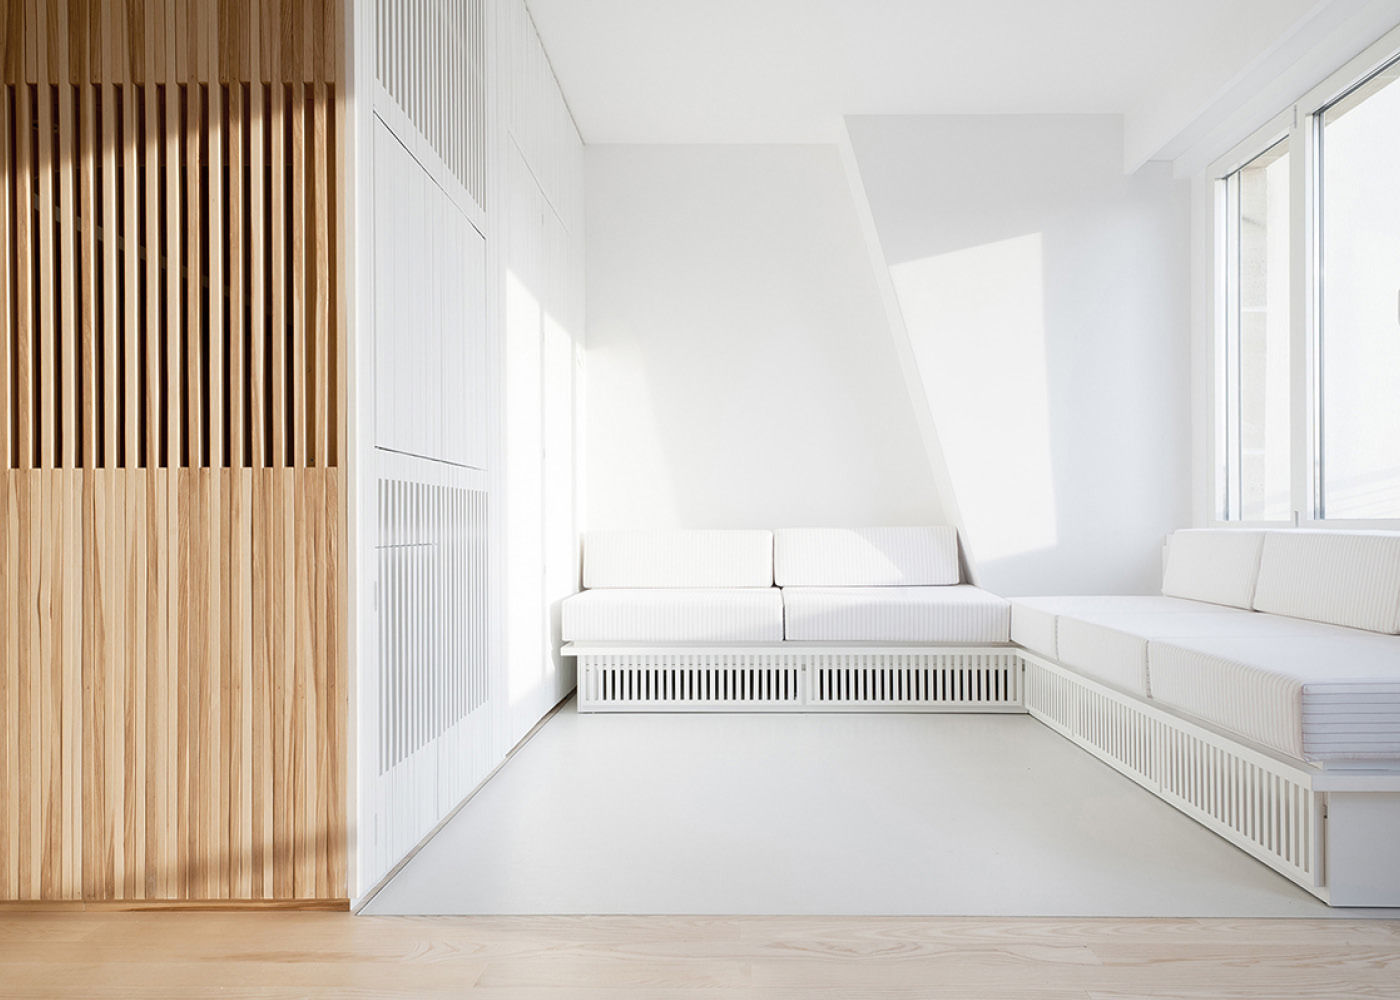 Flat N°4. A small ap, Julien Joly Architecture Julien Joly Architecture Salones minimalistas